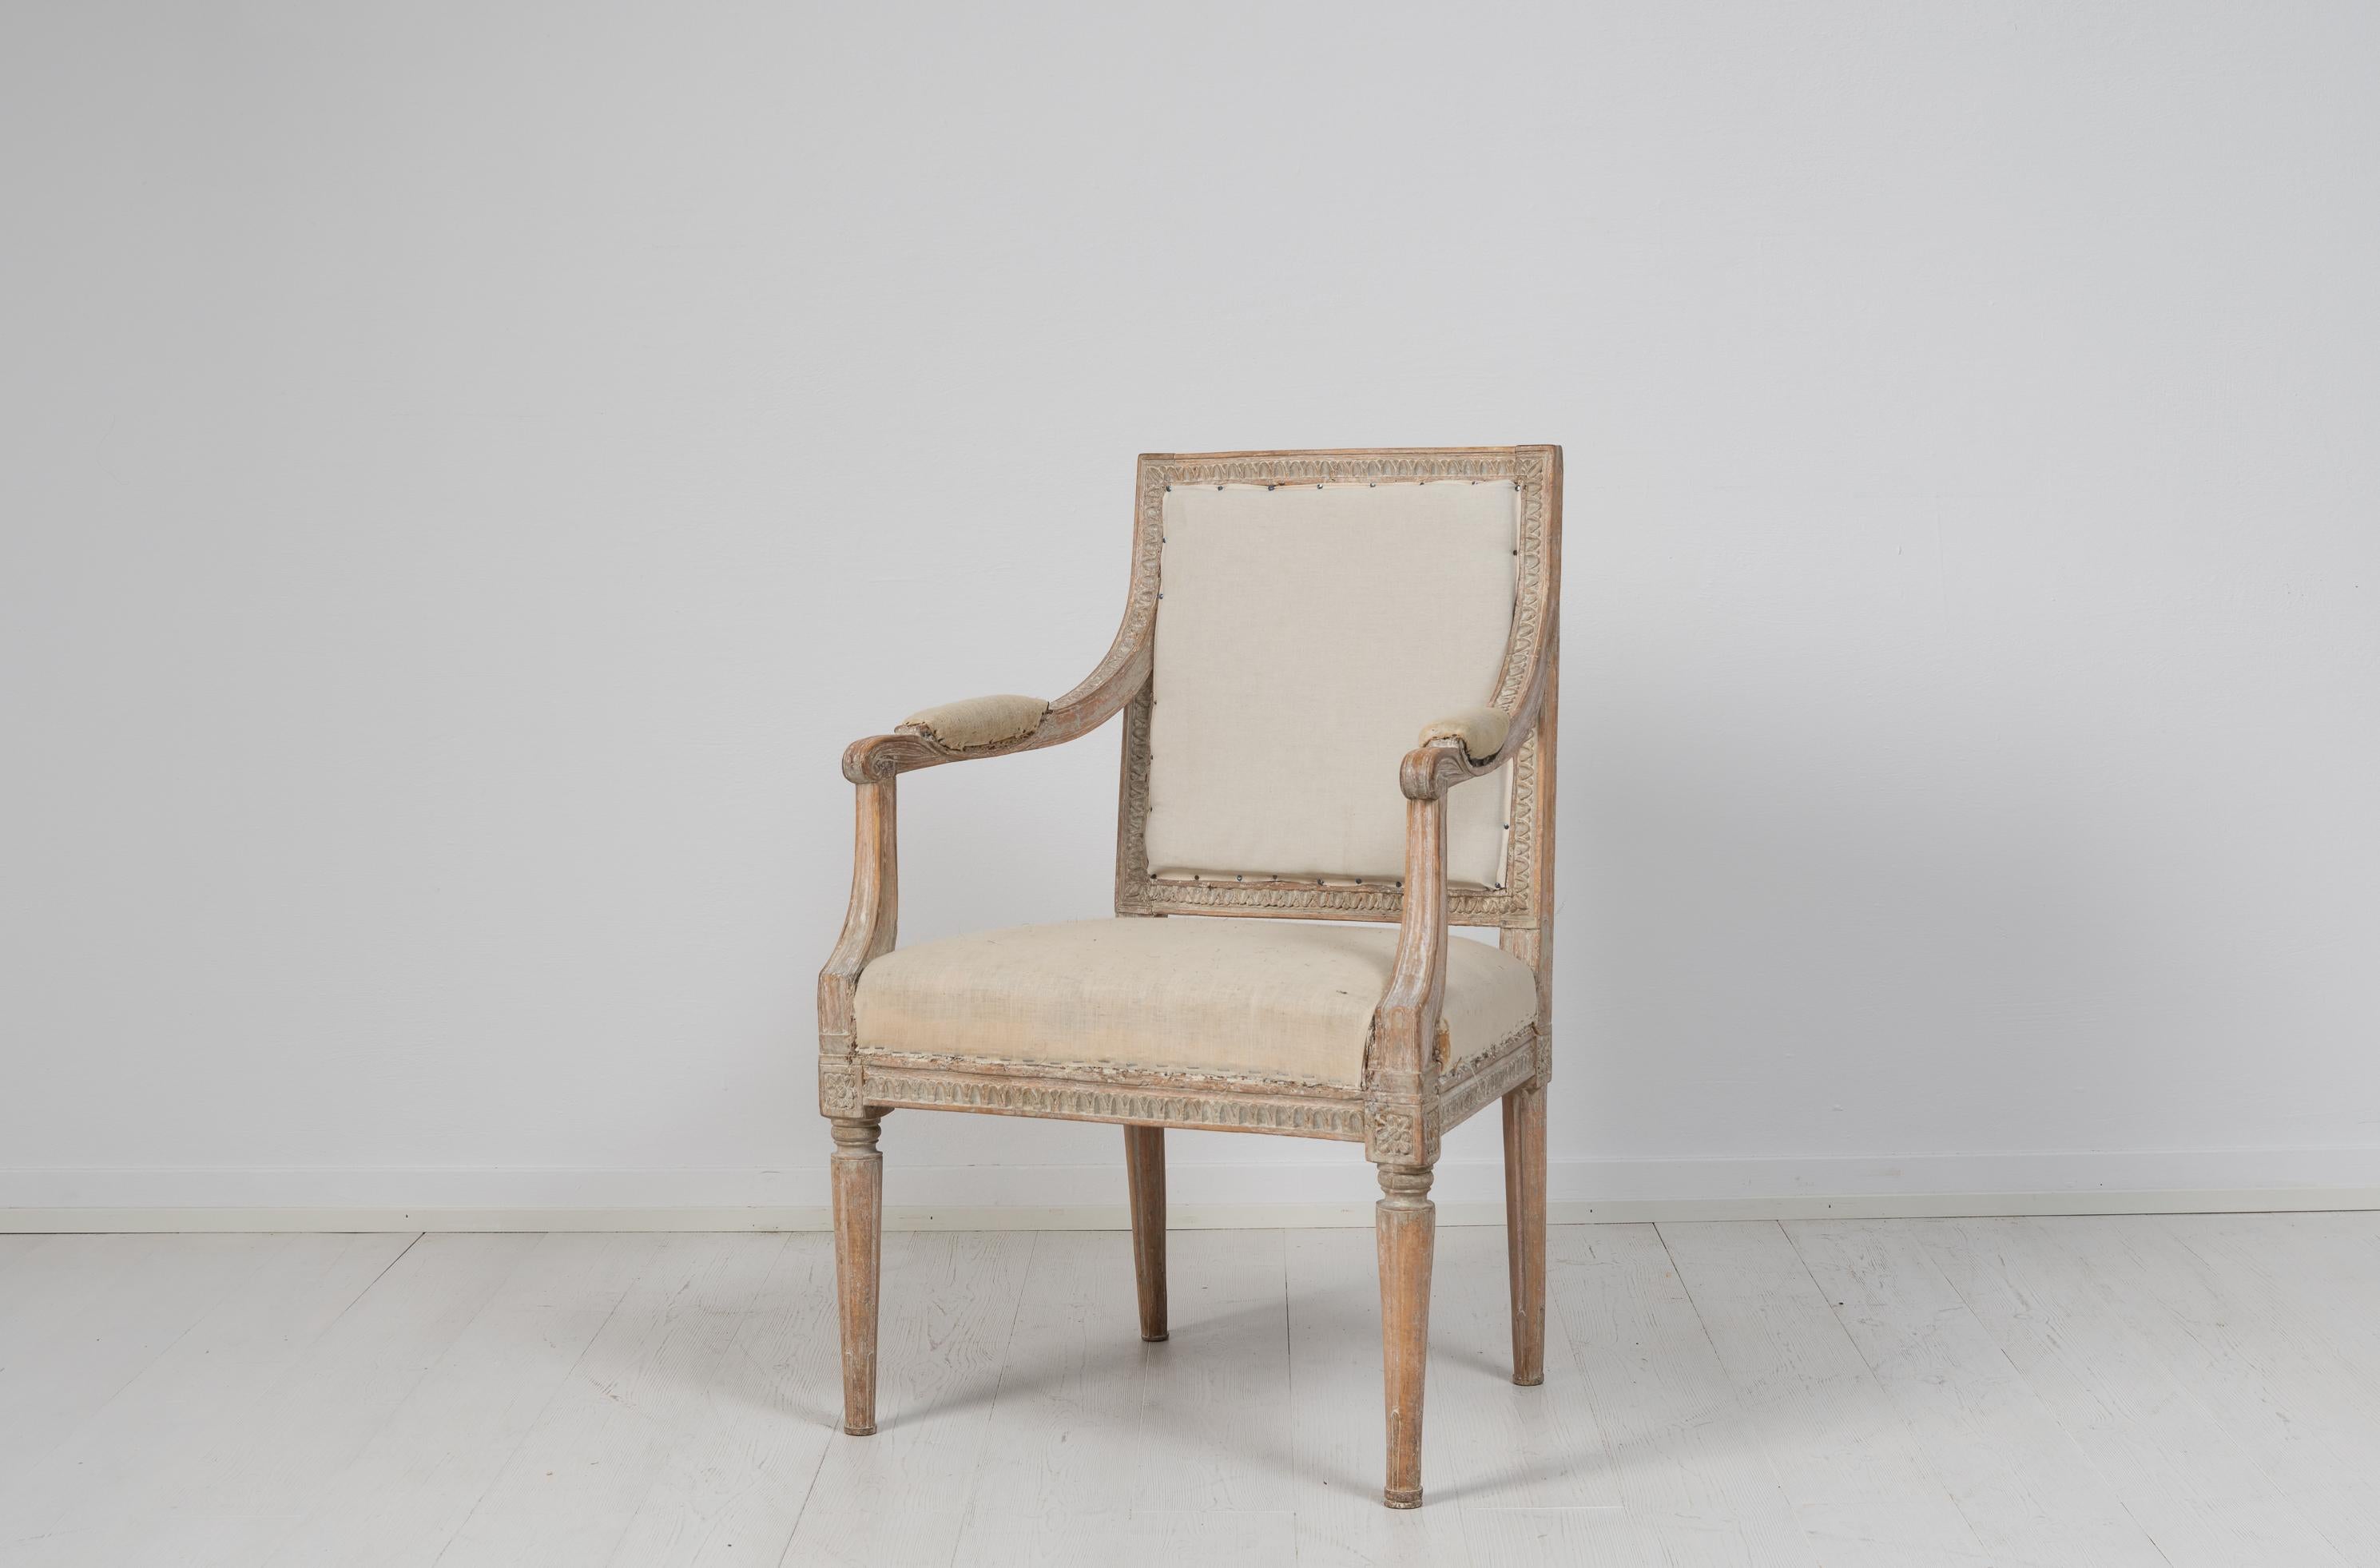 Hand-Crafted Late 18th Century Swedish Gustavian Upholstered Armchair